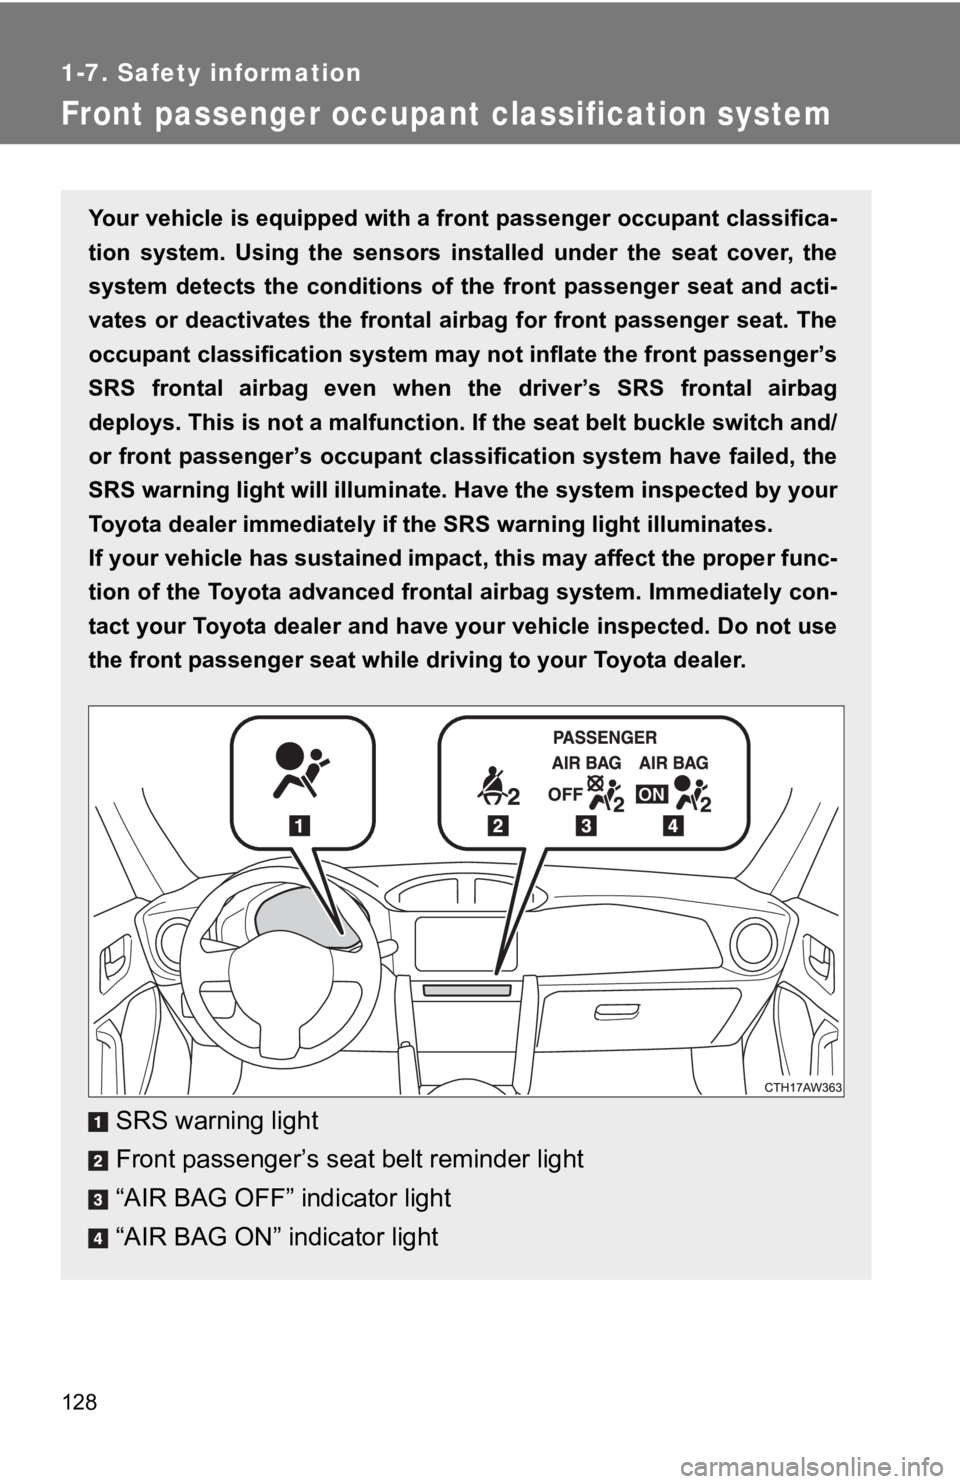 TOYOTA 86 2018  Owners Manual 128
1-7. Safety information
Front passenger occupant classification system
Your vehicle is equipped with a front passenger occupant classifica-
tion  system.  Using  the  sensors  installed  under  th